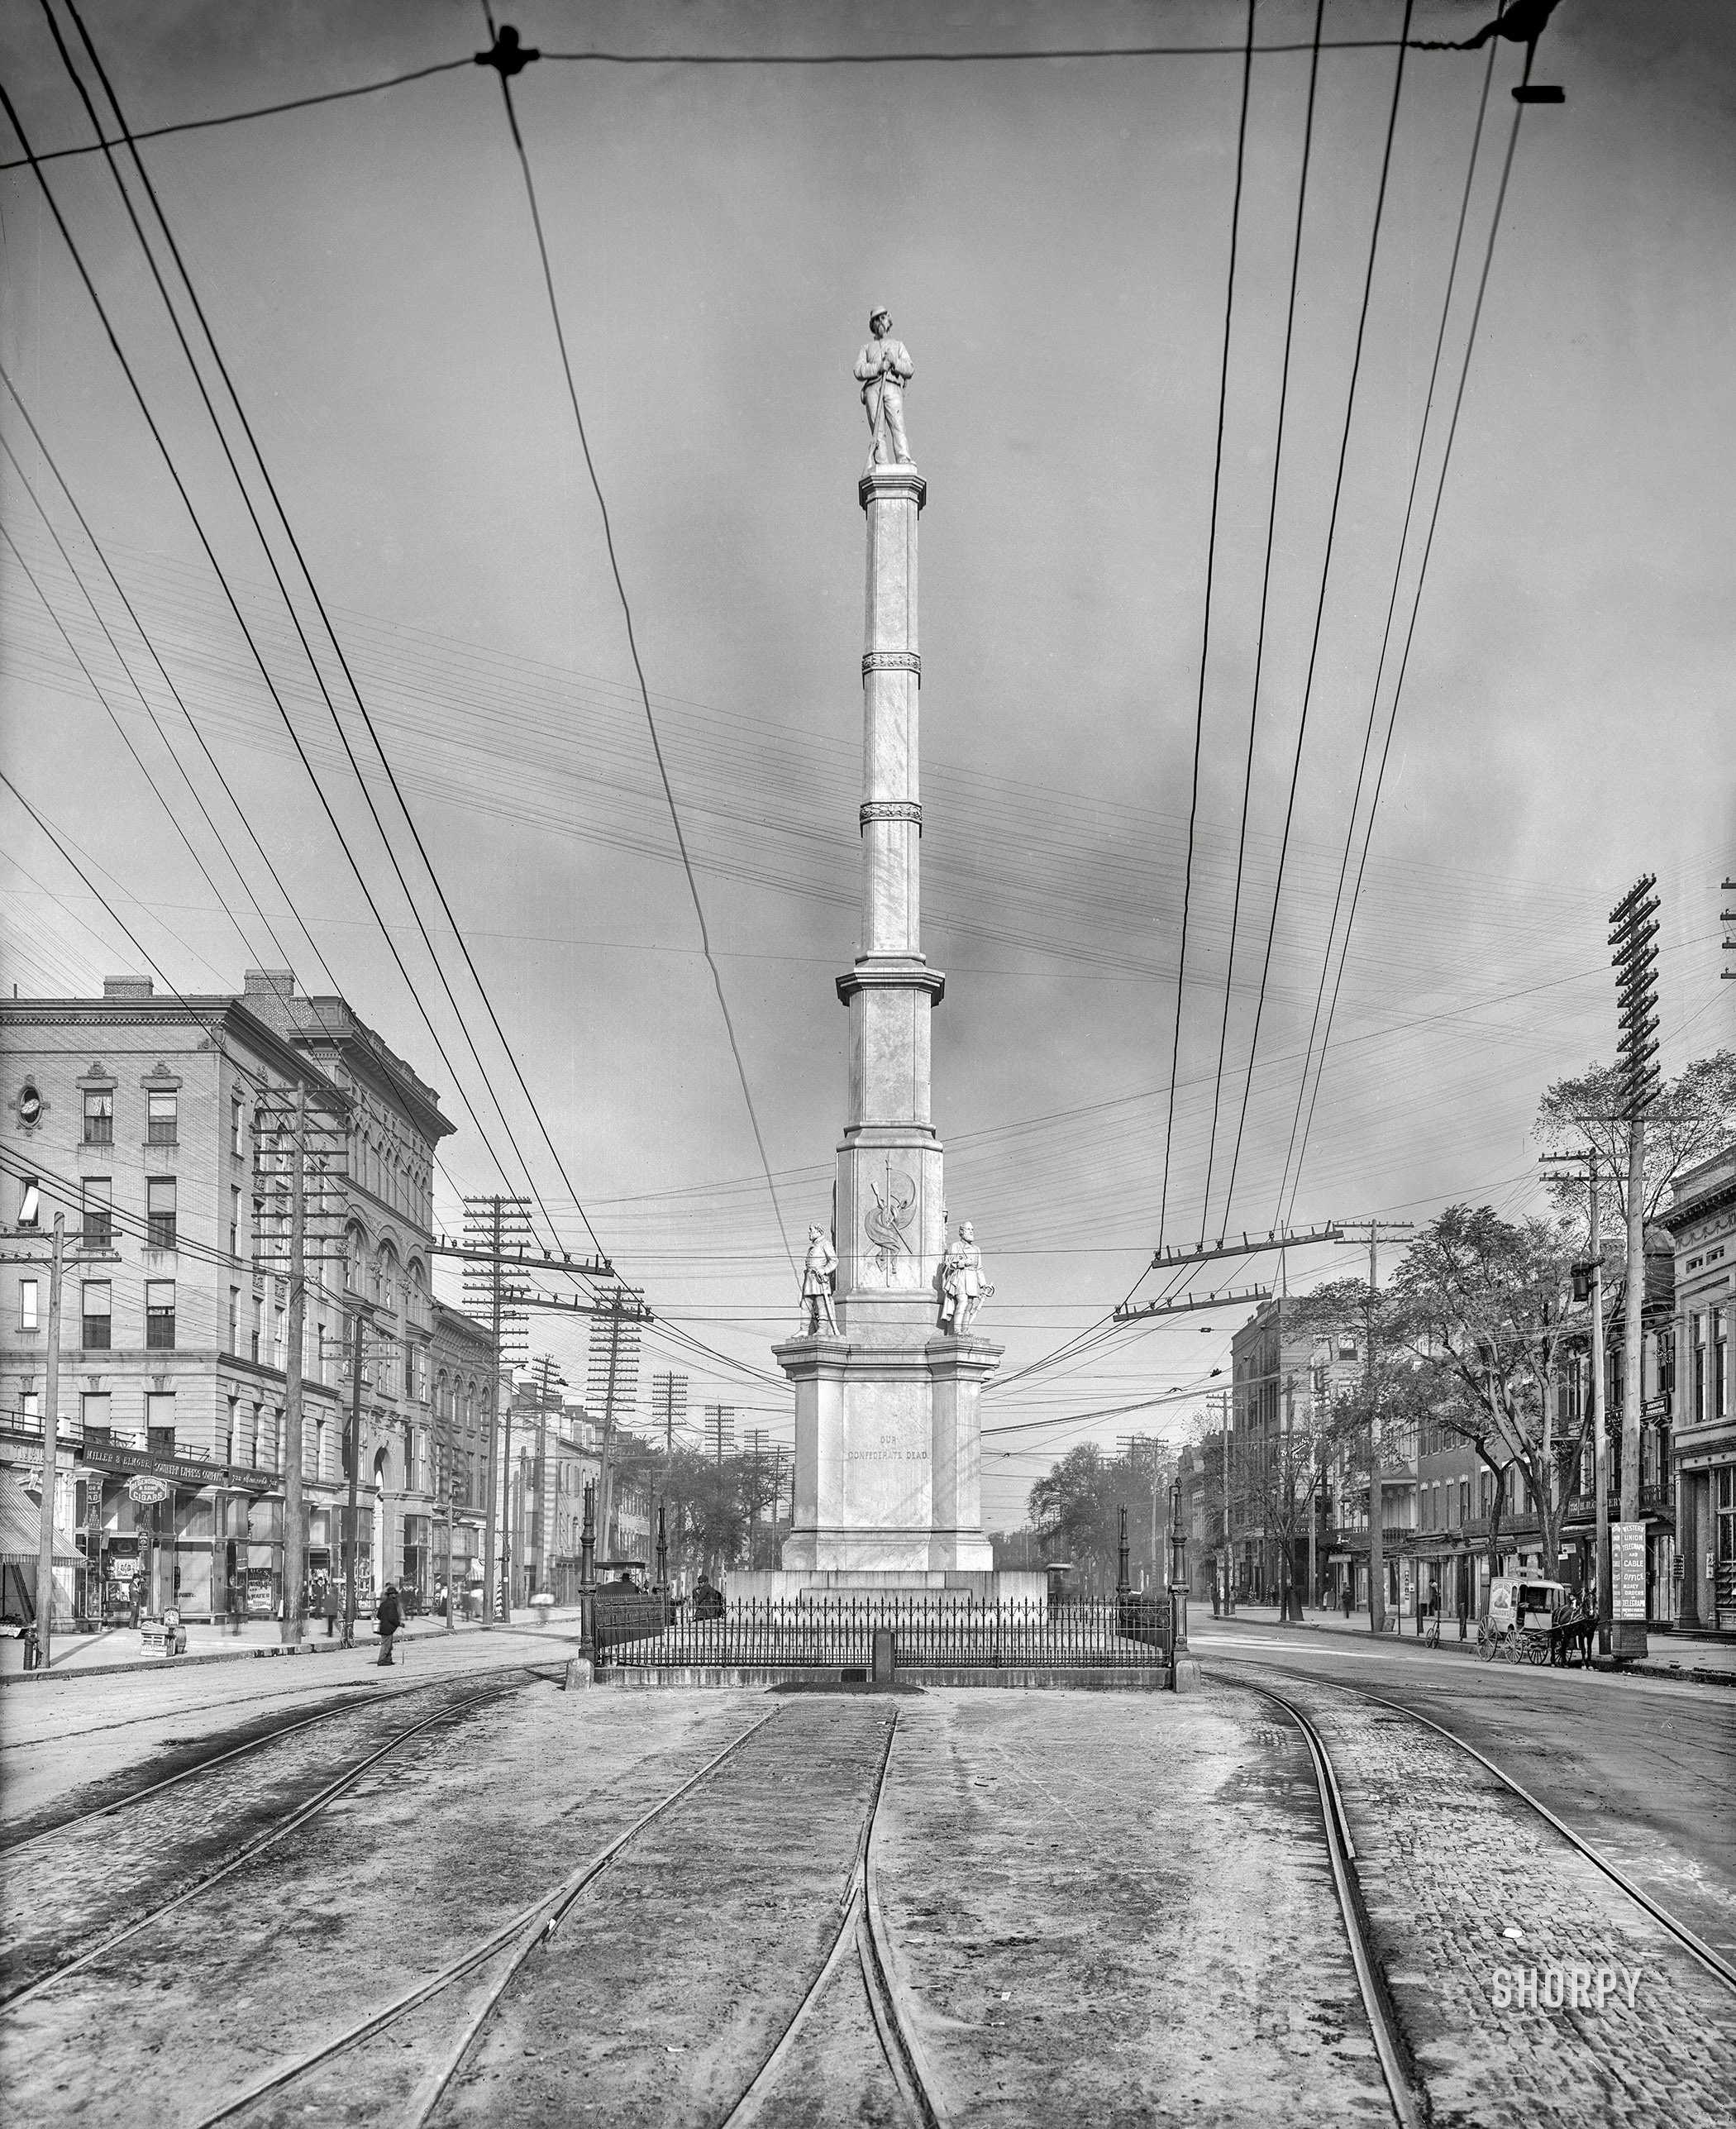 1903. "Confederate monument -- Augusta, Georgia." Johnny Reb in a wire web. 8x10 inch dry plate glass negative, Detroit Photographic Company. View full size.